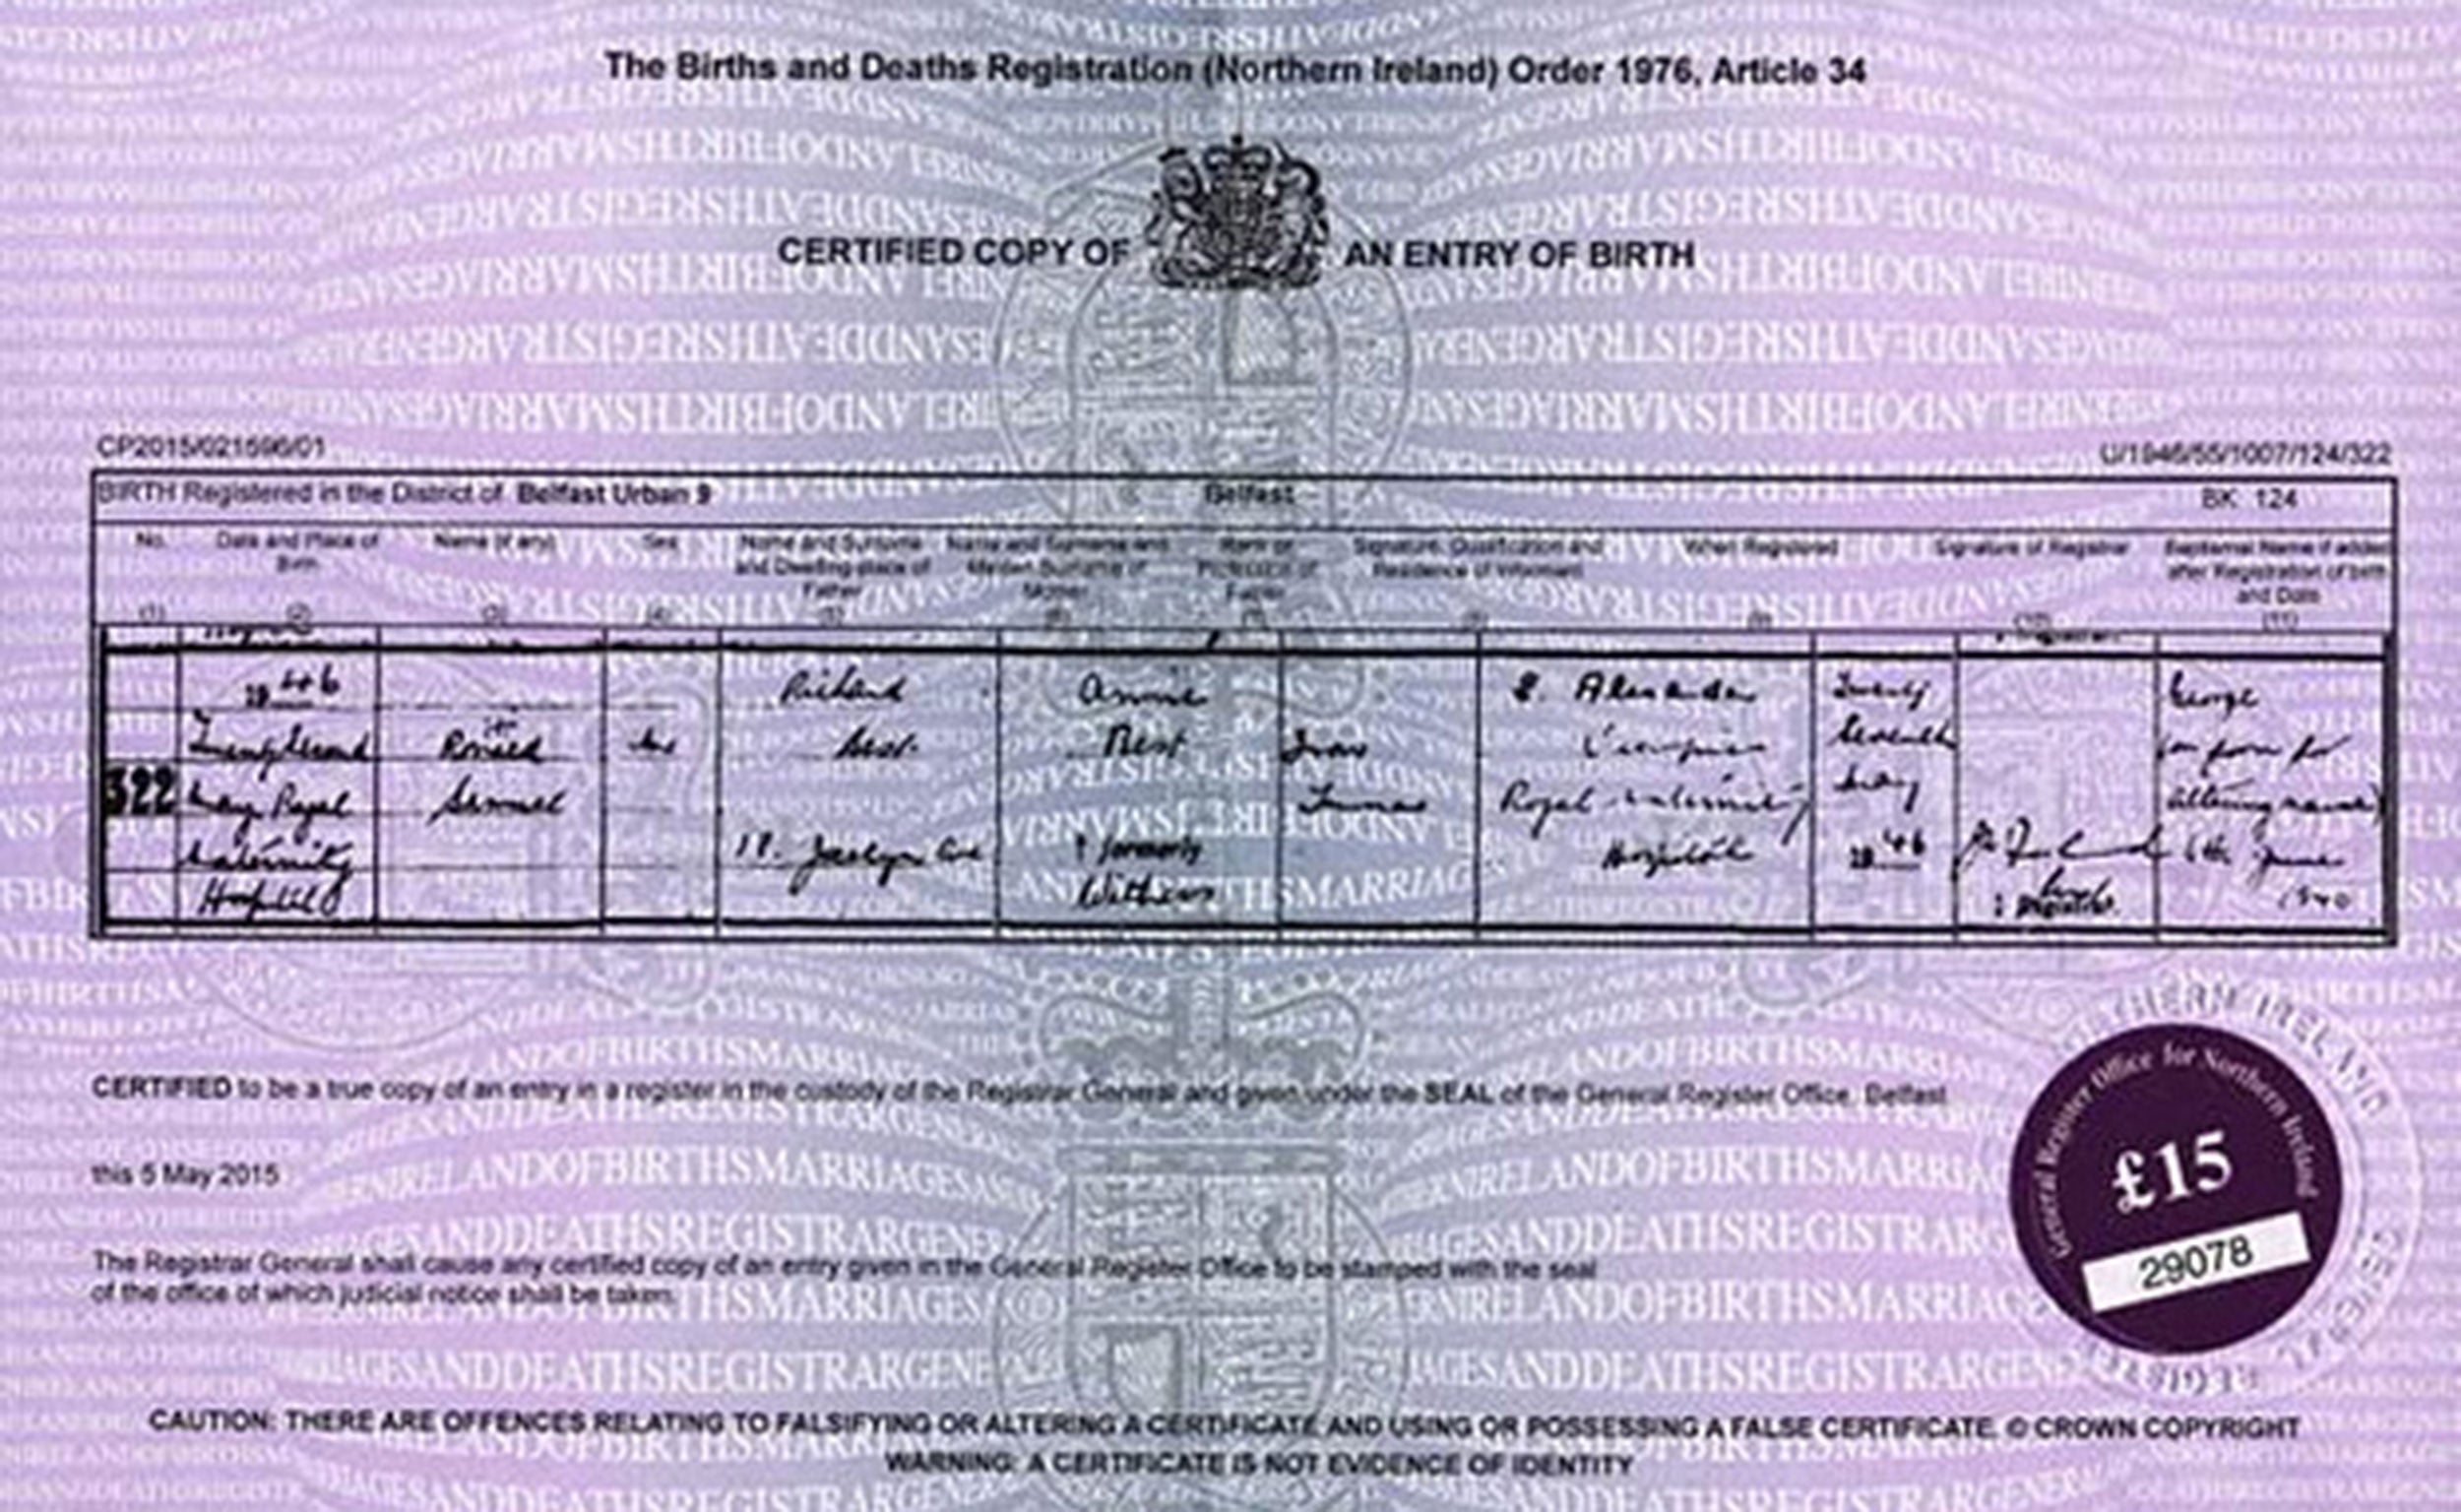 A picture of George Best's birth certificate